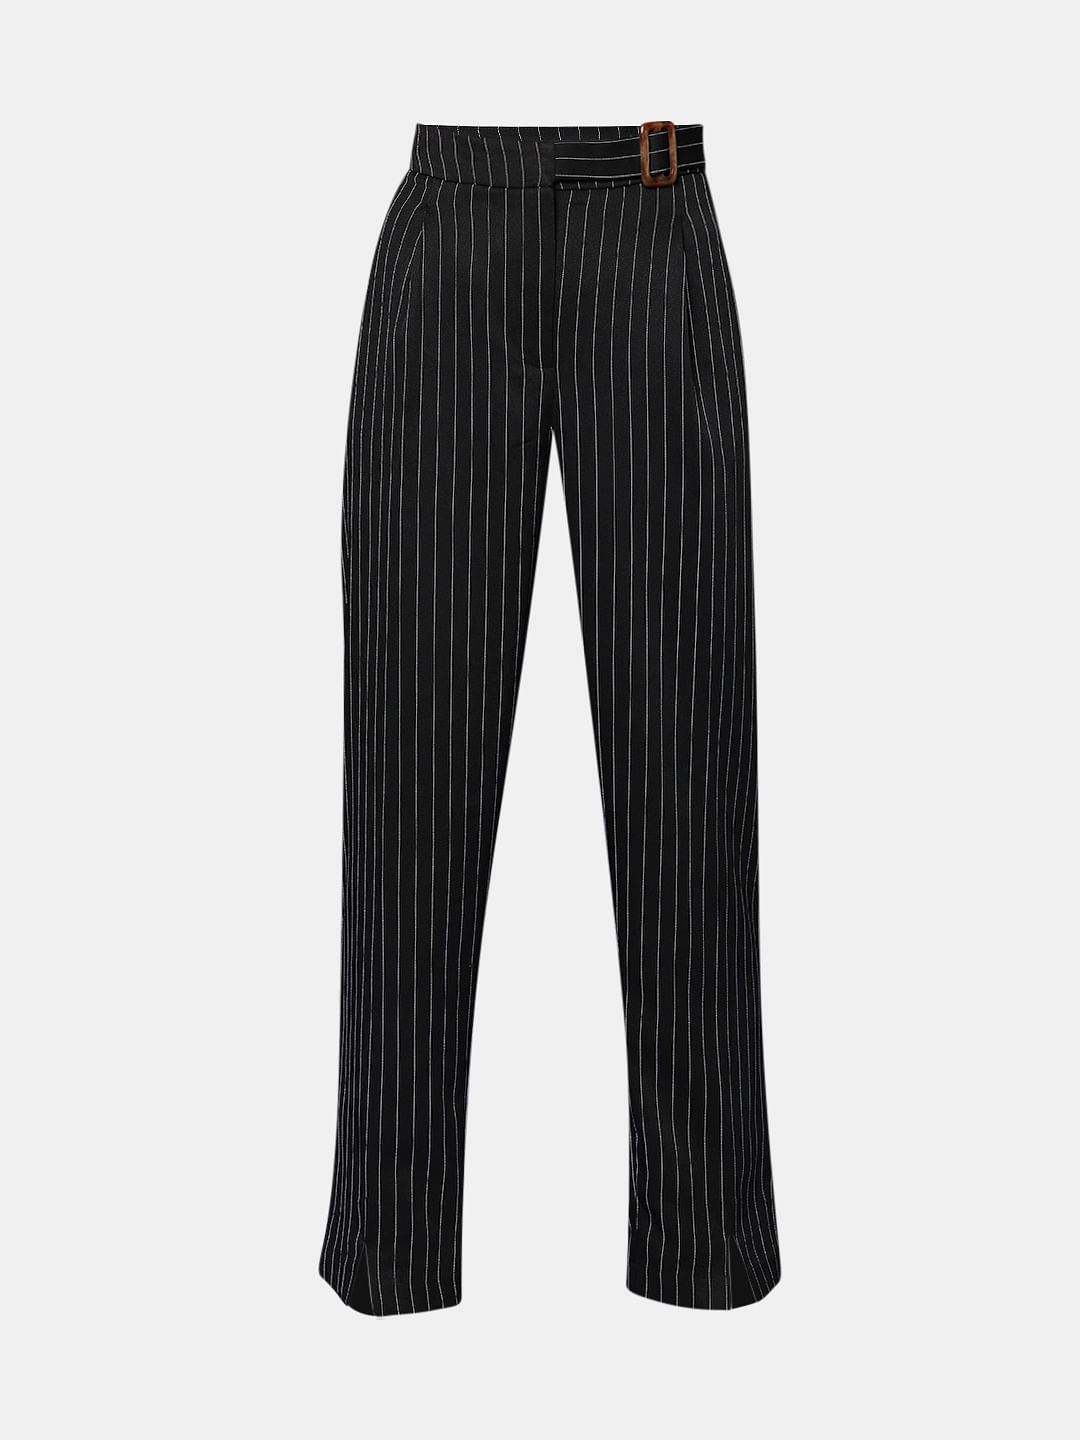 Get Waist Tie Monochrome Striped Poly Crepe Flared Trousers at  499  LBB  Shop